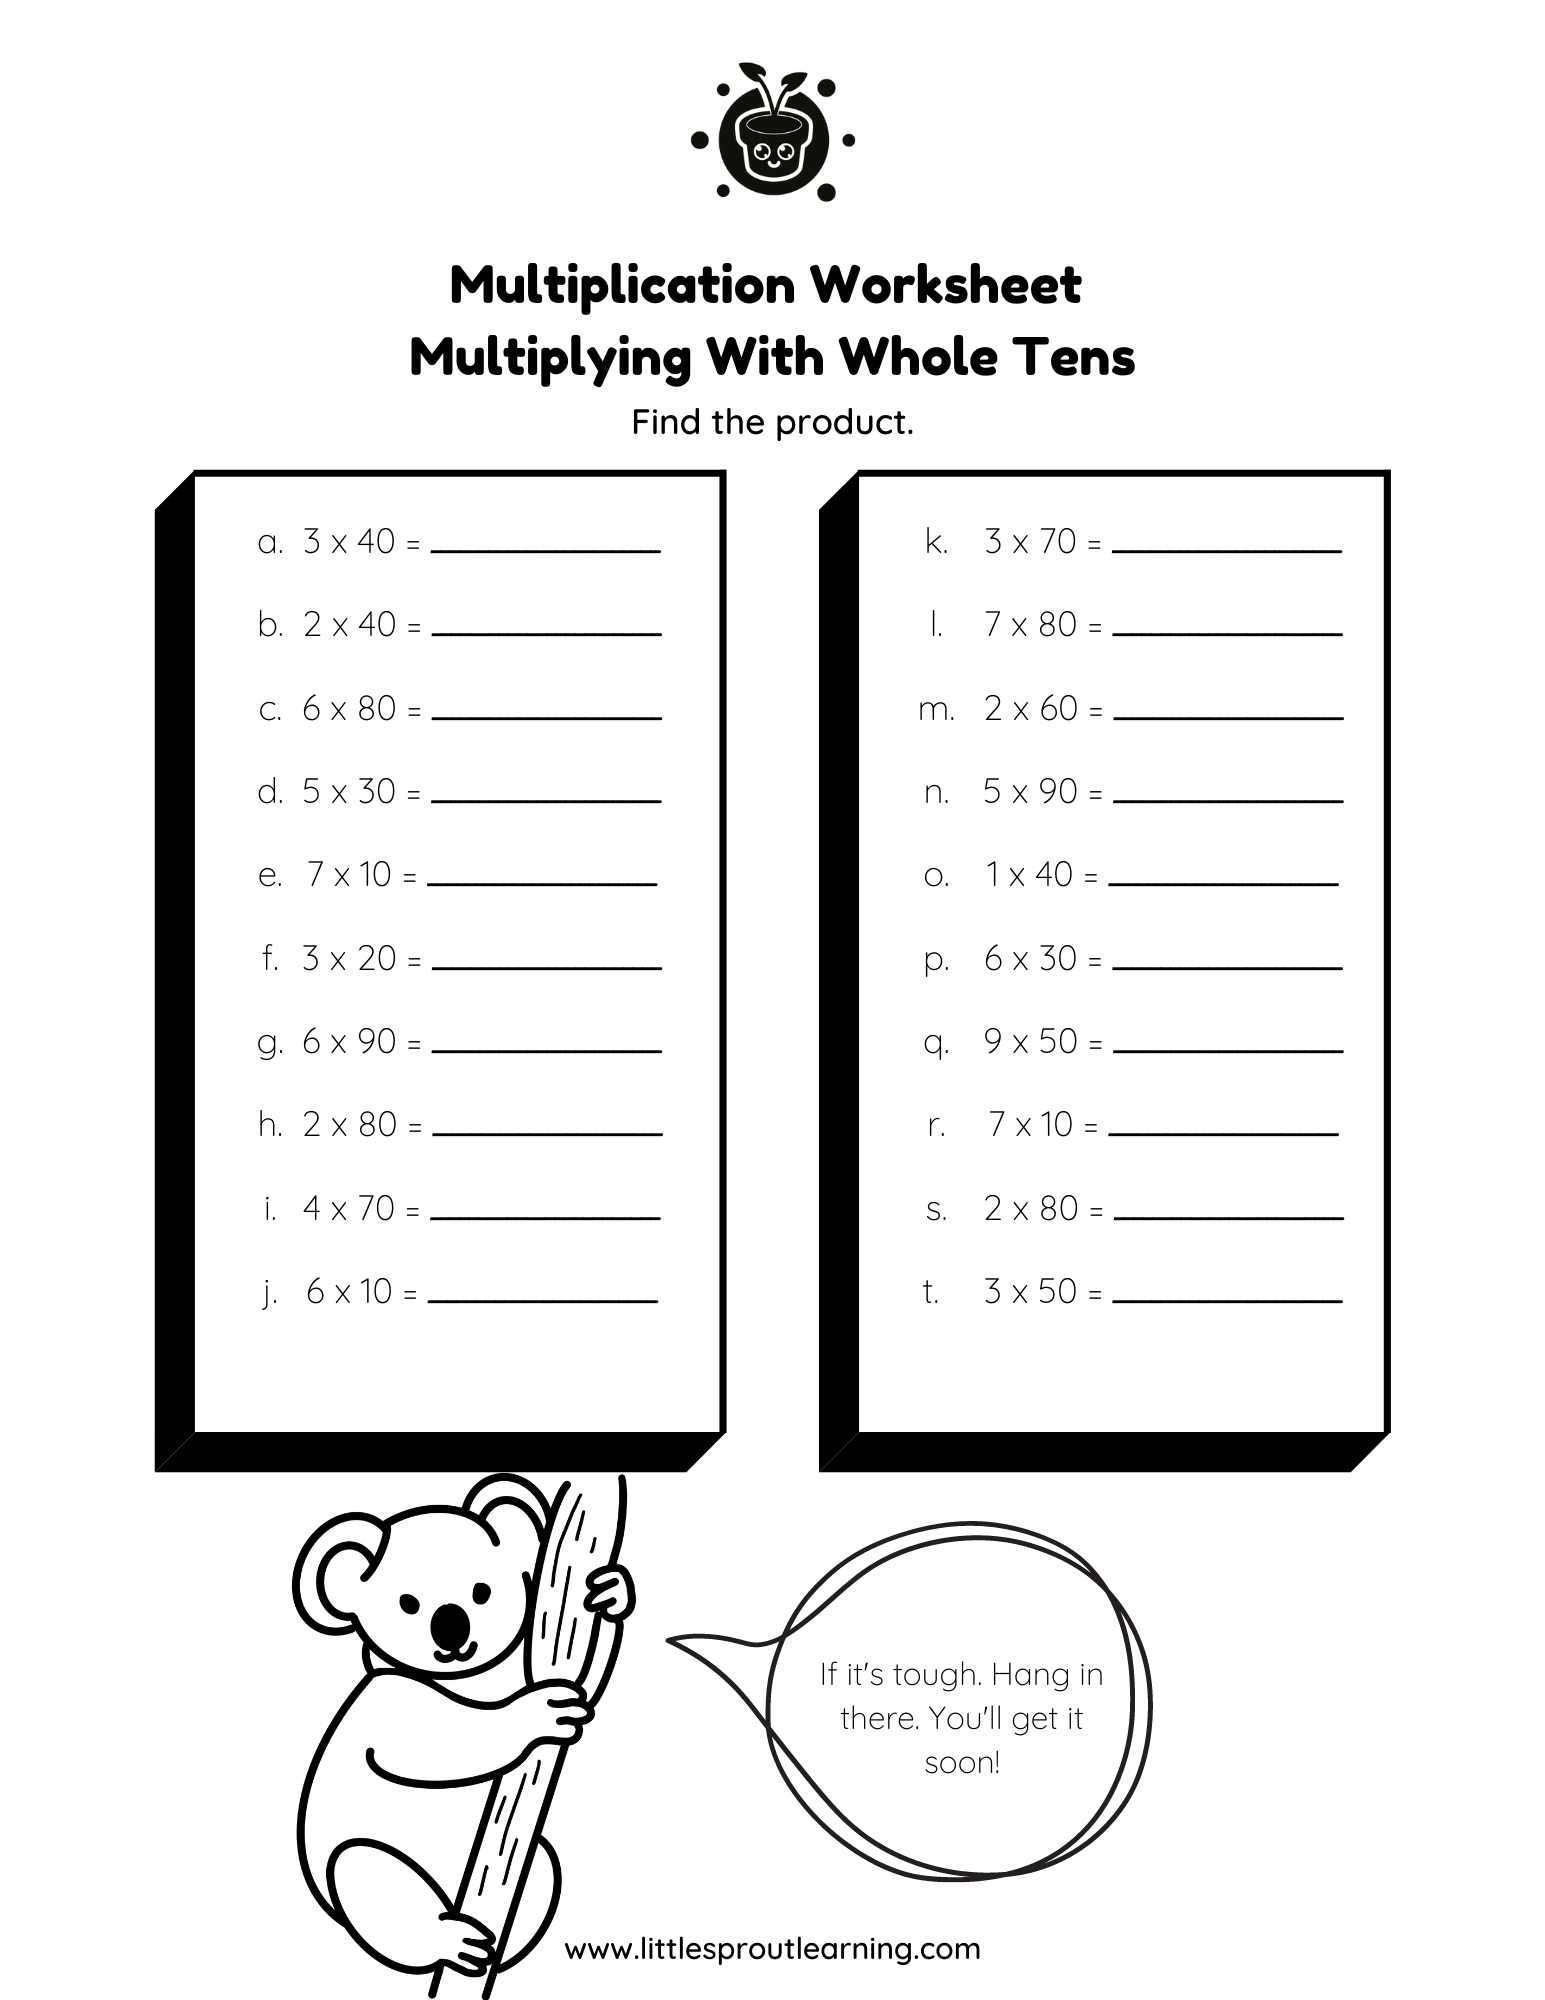 Multiplying with Whole Tens Math Worksheet Free